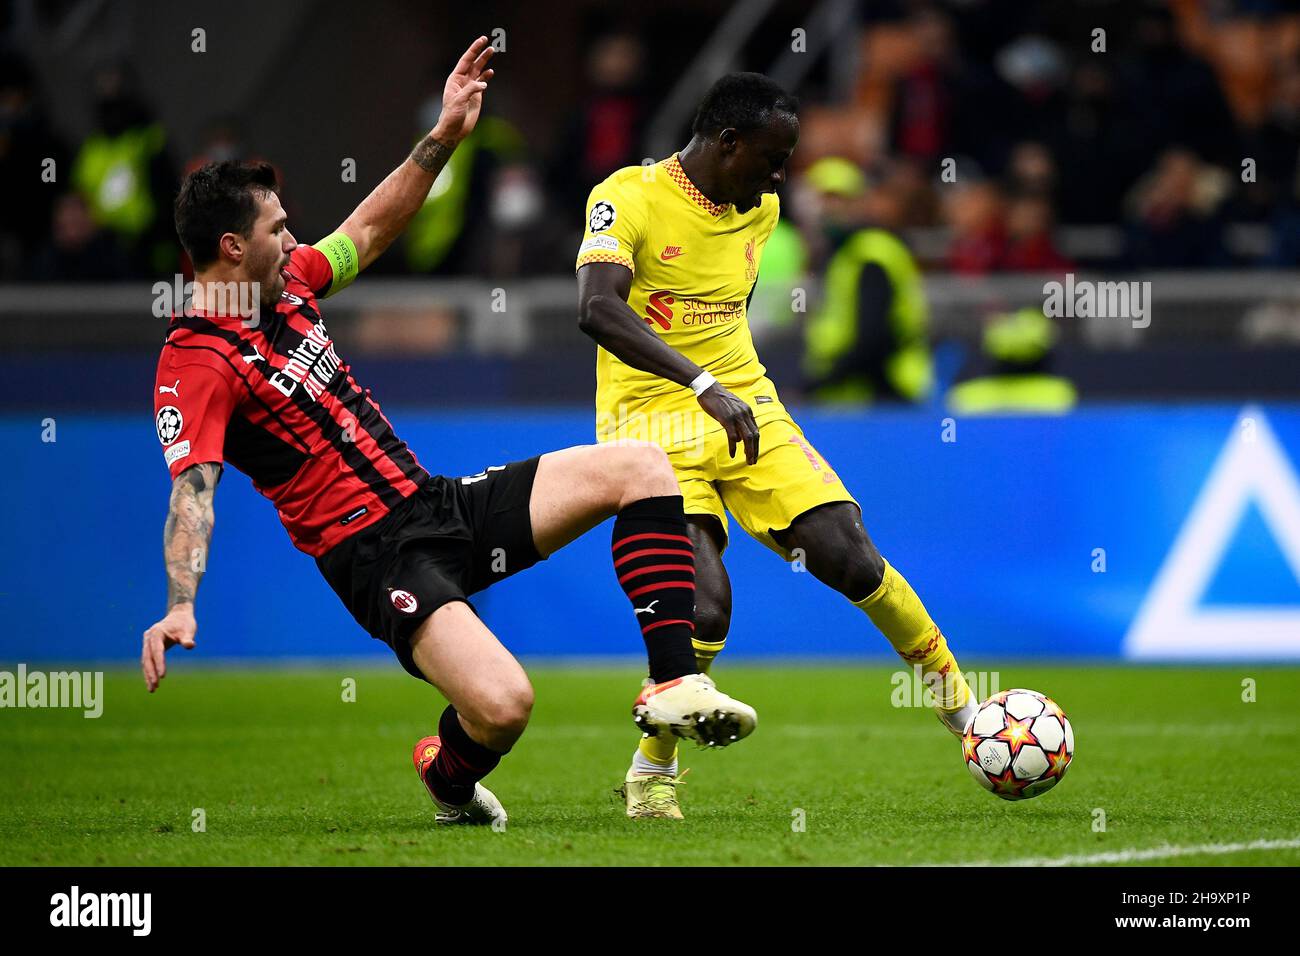 Milan, Italy. 07 December 2021. Sadio Mane of Liverpool FC is tackled by Alessio Romagnoli of AC Milan during the UEFA Champions League football match between AC Milan and Liverpool FC. Credit: Nicolò Campo/Alamy Live News Stock Photo